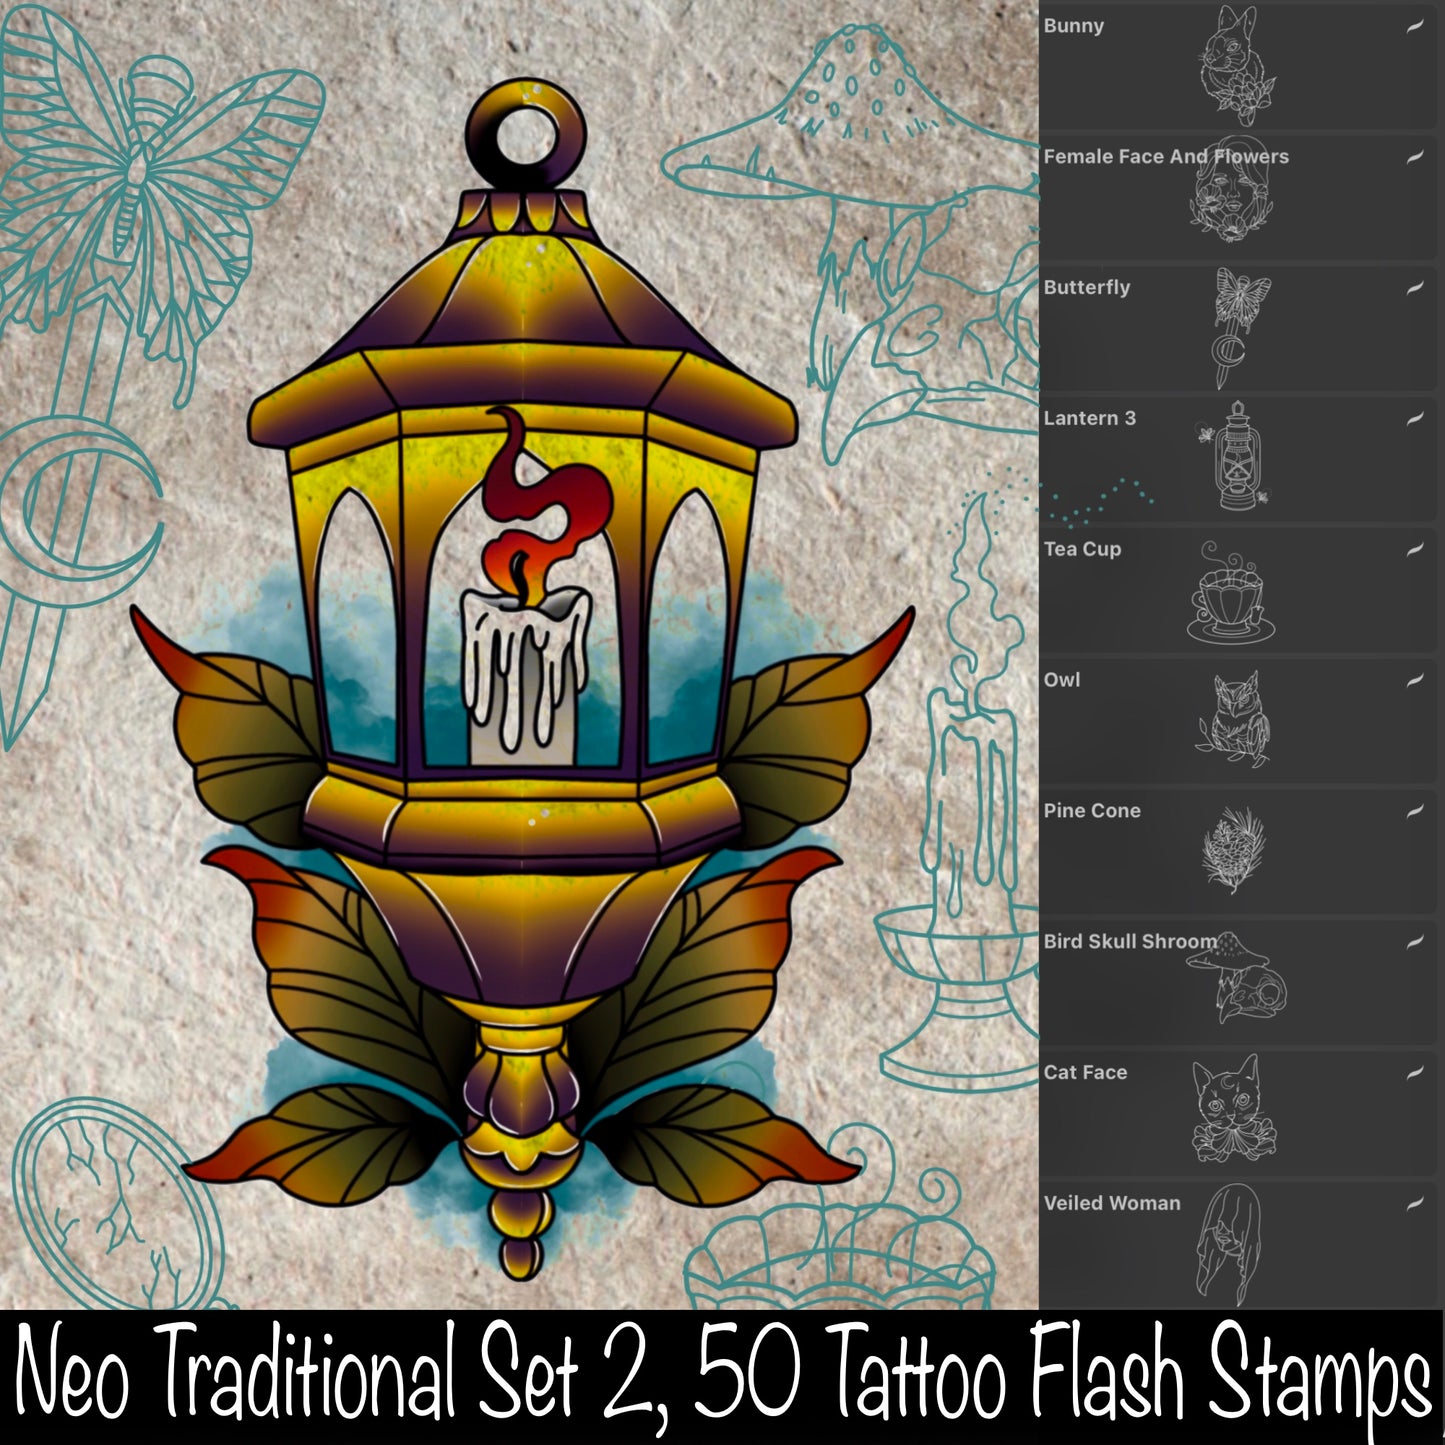 Neo Traditional Set 2, 50 Tattoo Flash Stamps